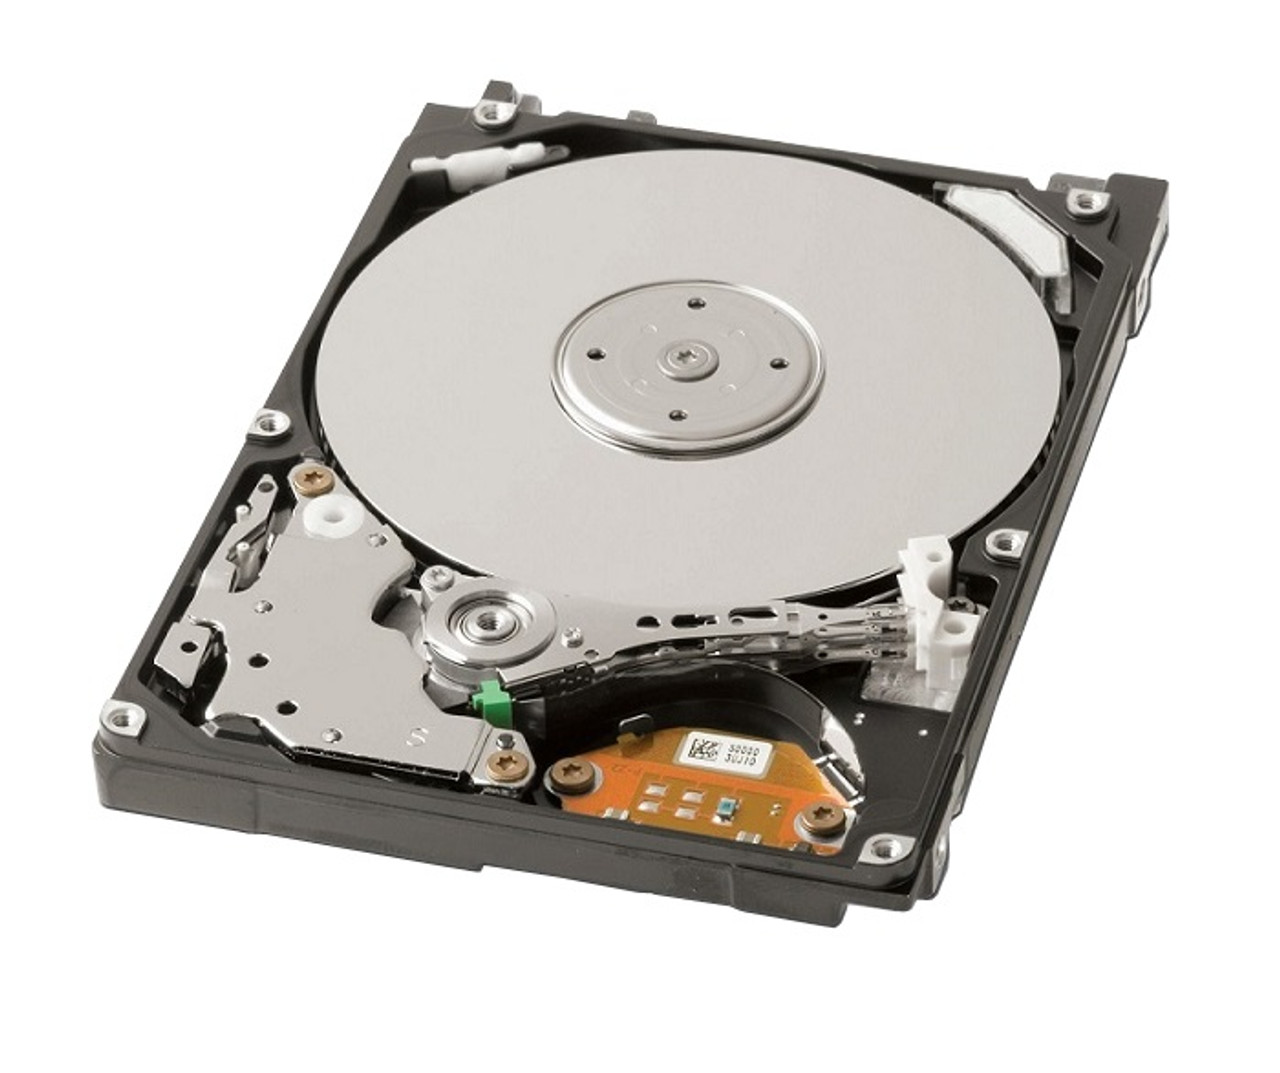 HDD2D37S - Toshiba 100GB 5400RPM SATA 1.5Gb/s 8MB Cache 9.5mm 2.5-Inch Notebook Hard Disk Drive